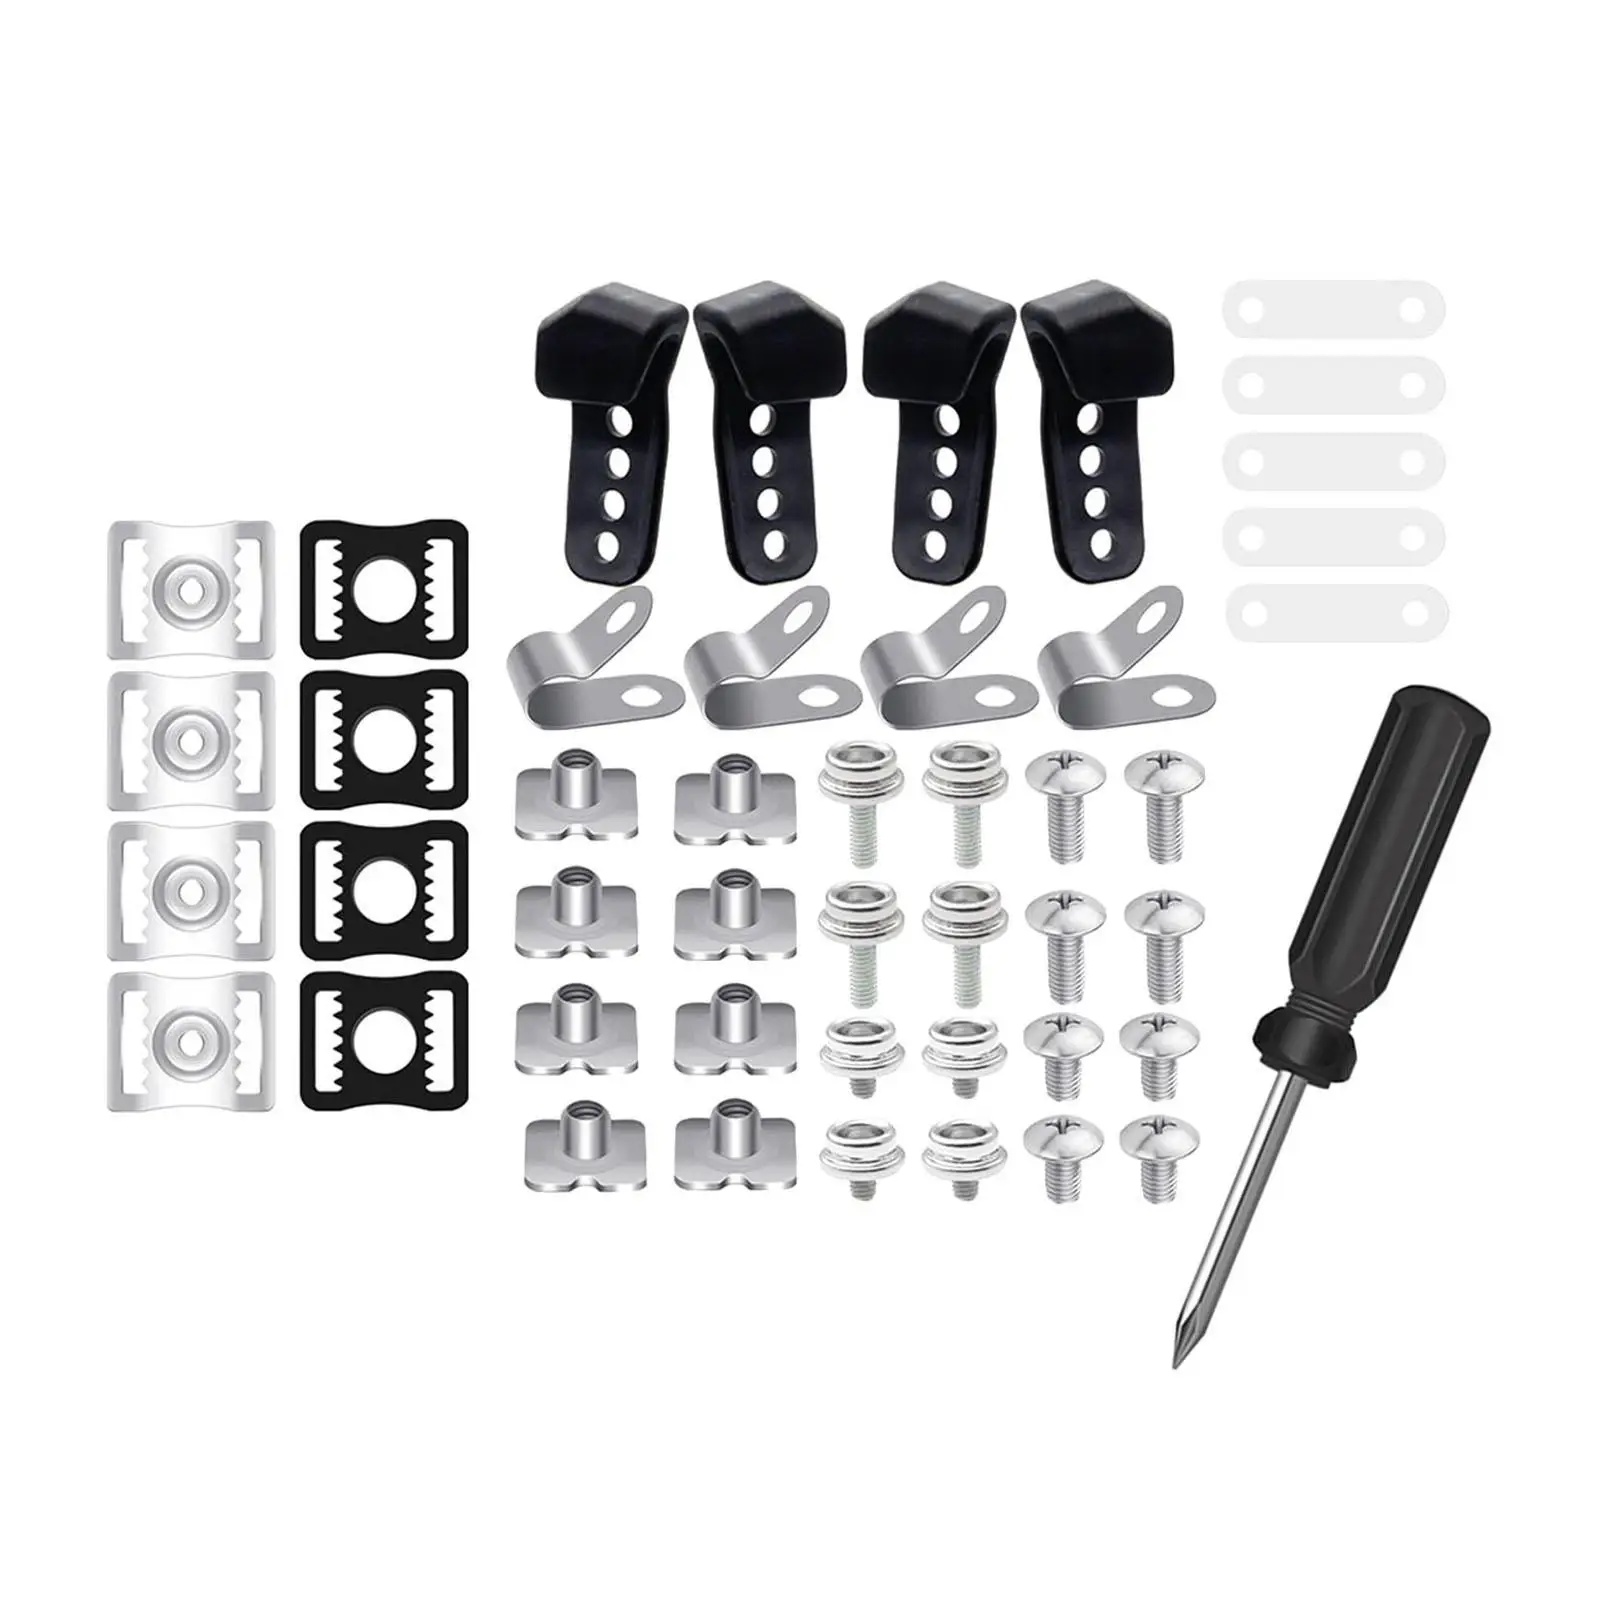 Hockey Visor Hardware Screw Repair Kit Washers Nuts Practical Replacement Safety Accessories Fixings Spare Hardware Kit